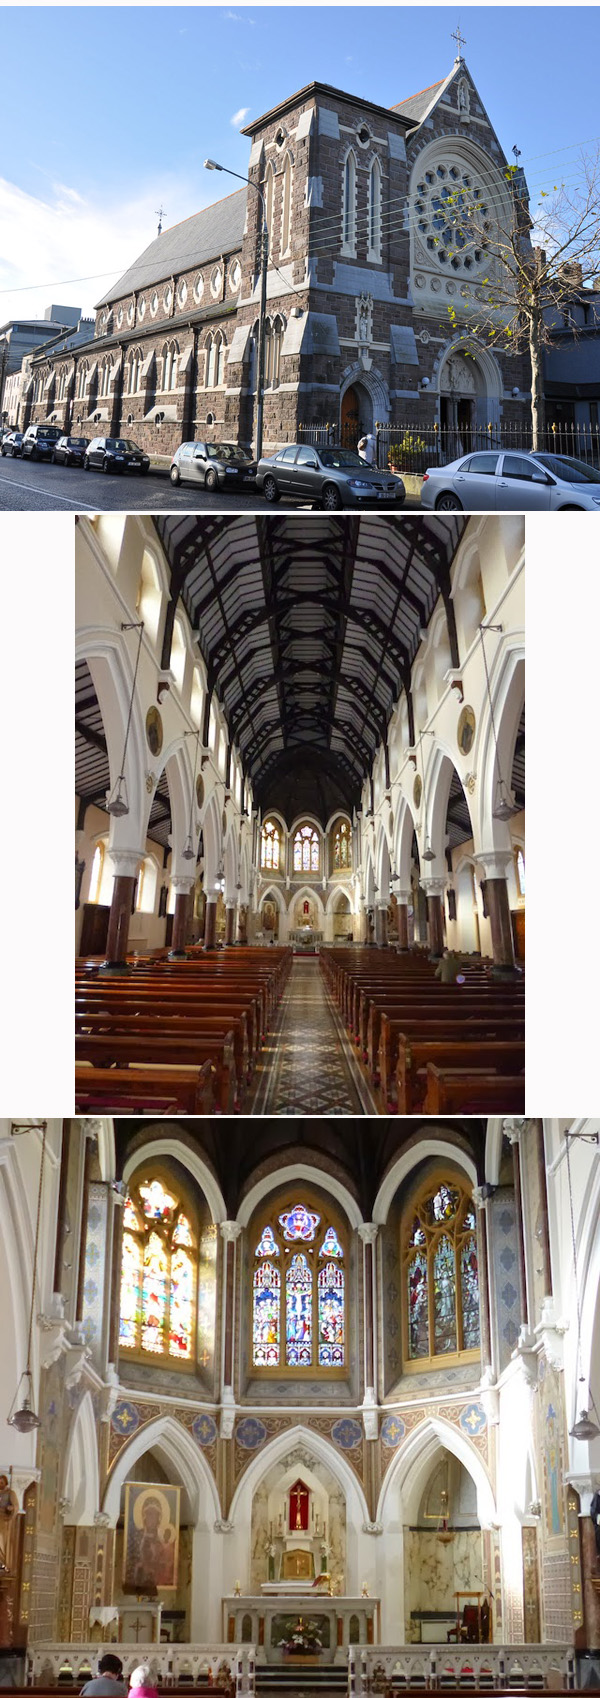 Holy Cross Domican Church in Tralee, Ireland